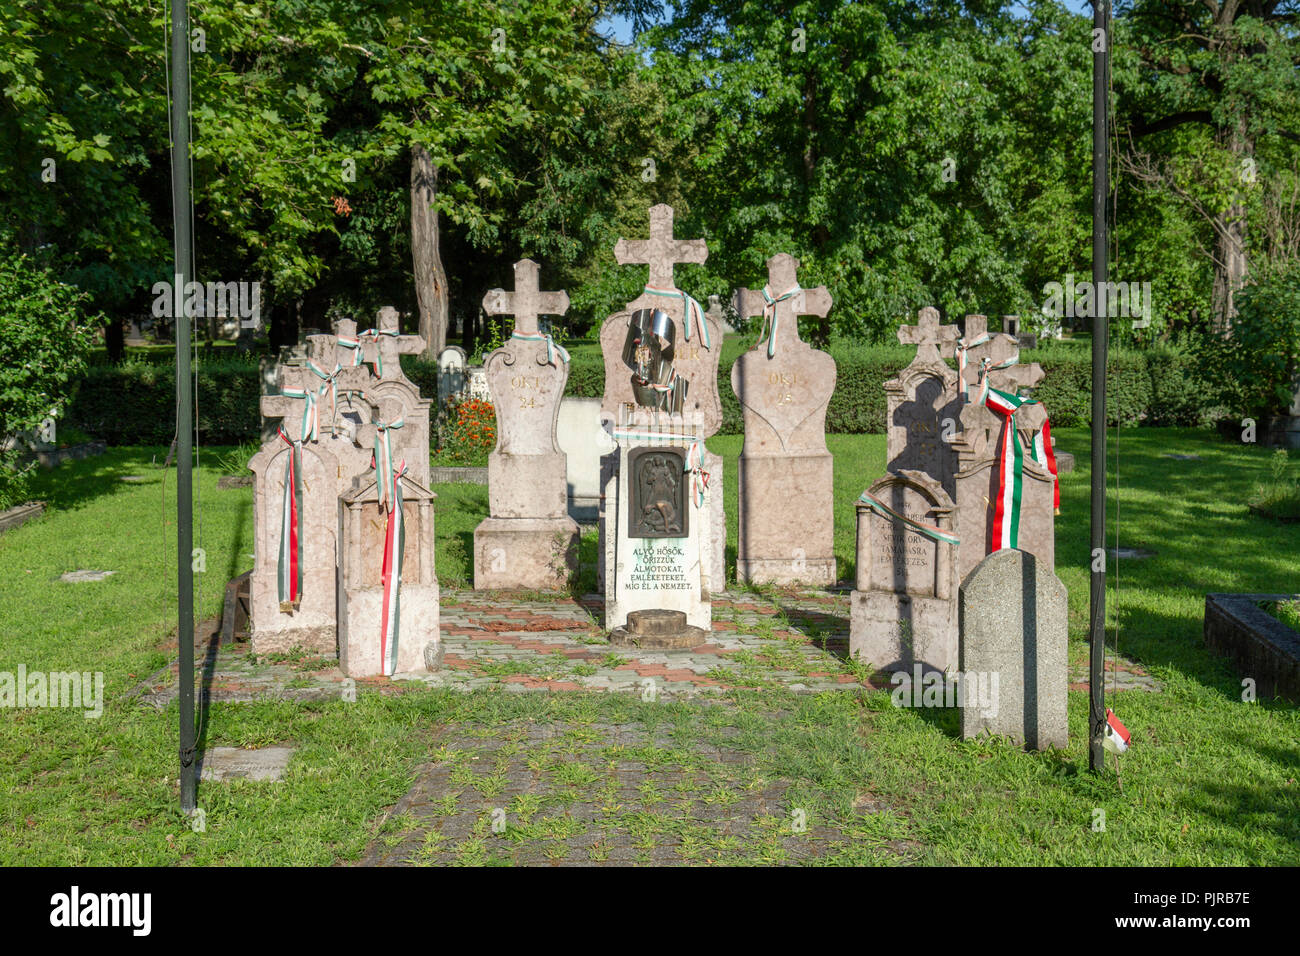 Graves from the Hungarian Revolution in November 1956 in the Kerepesi Cemetery (Fiume Road National Graveyard), Budapest, Hungary. Stock Photo